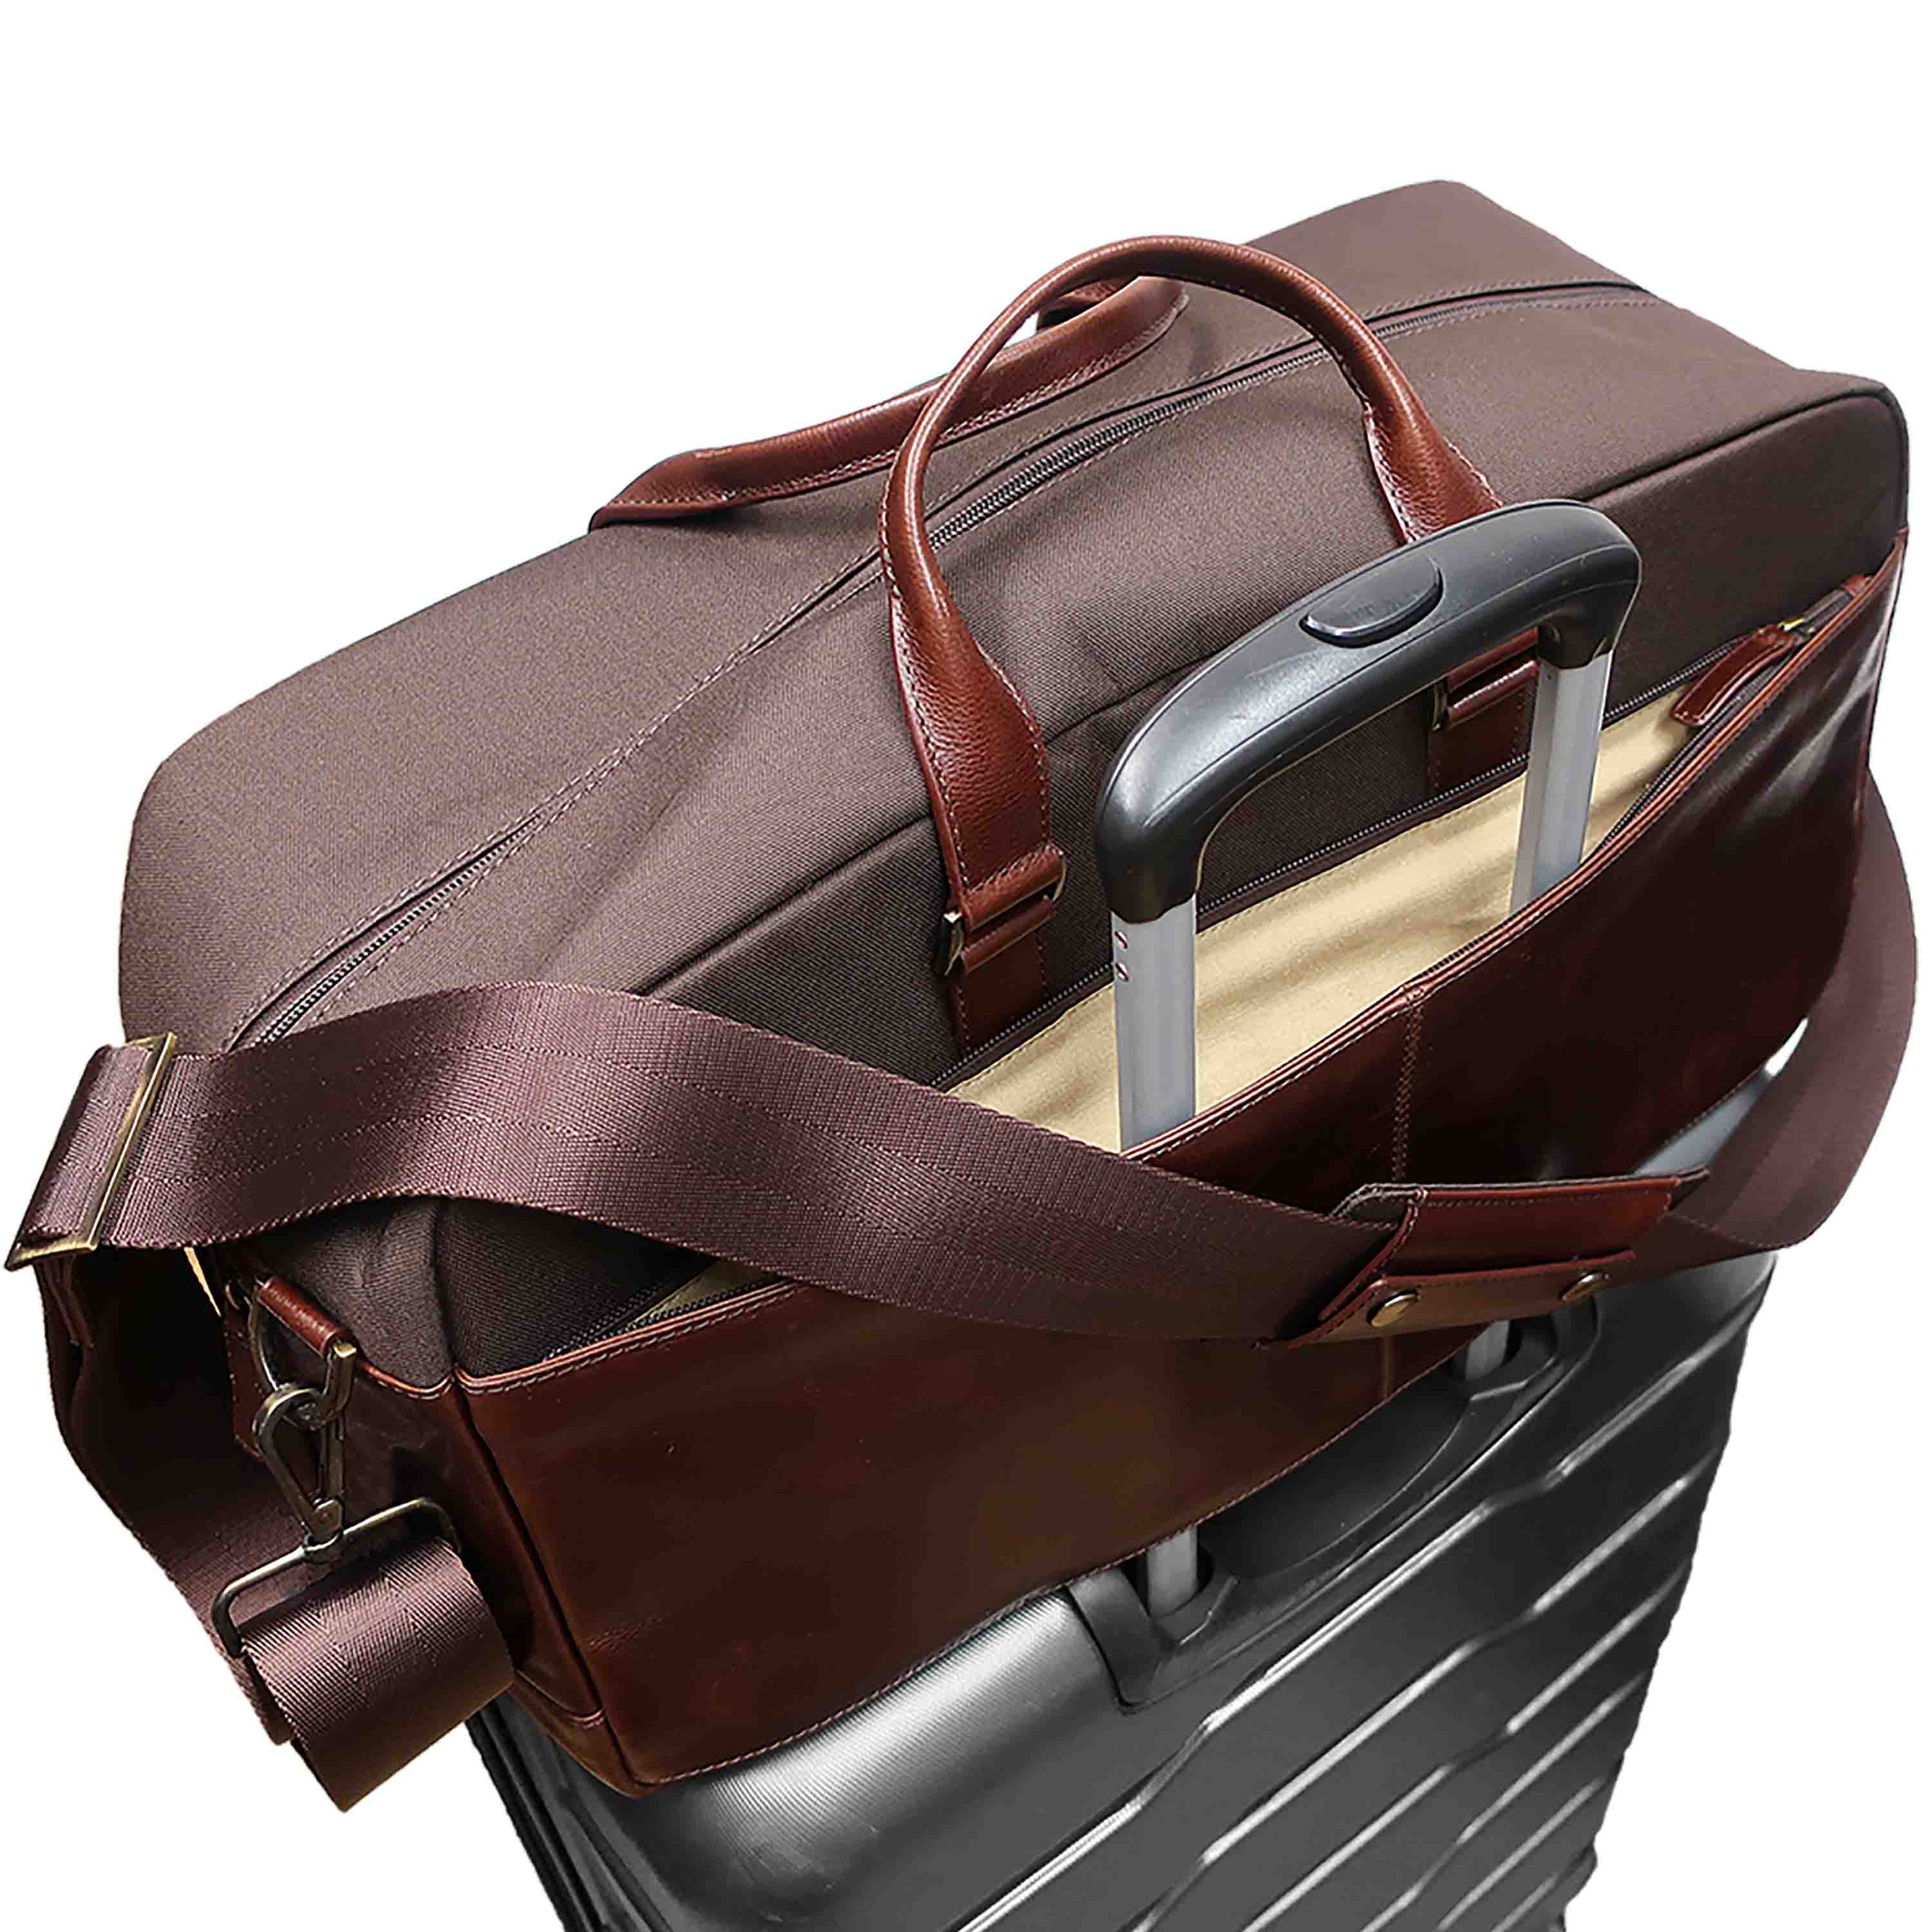 a piece of luggage with a leather handle